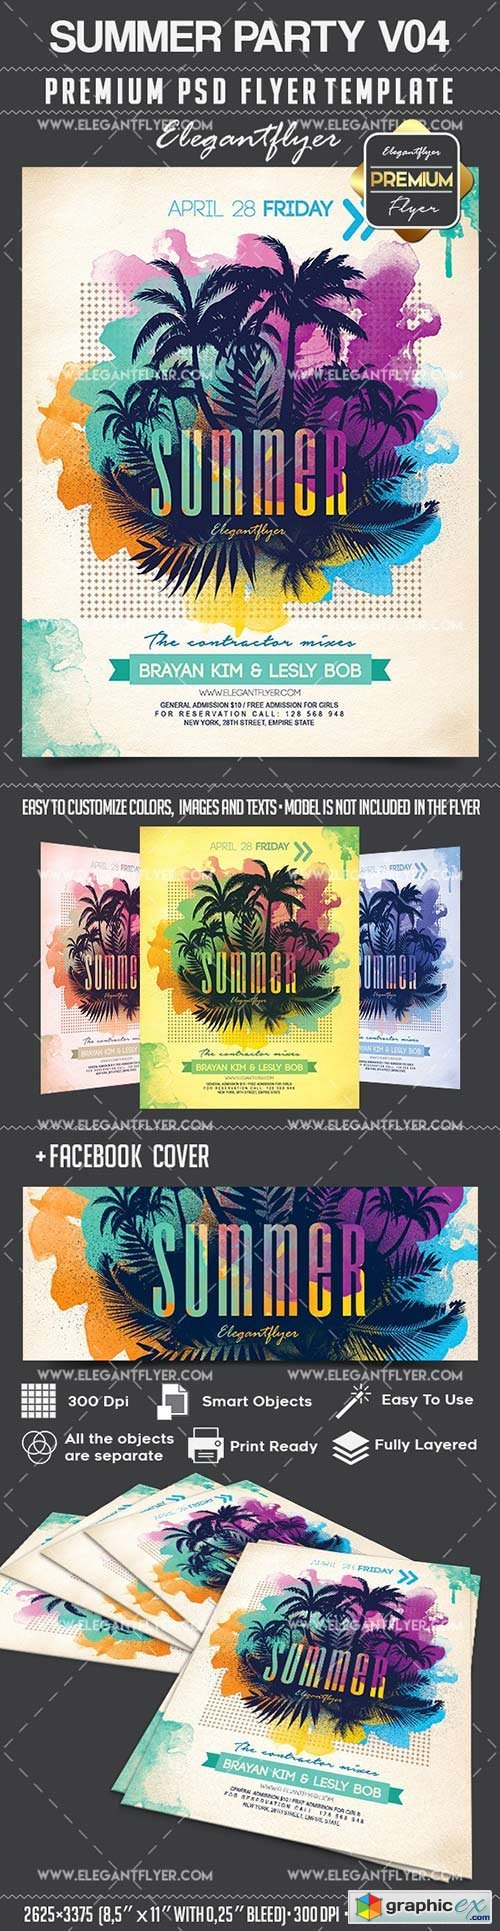 Summer Party V04  Flyer PSD Template + Facebook Cover